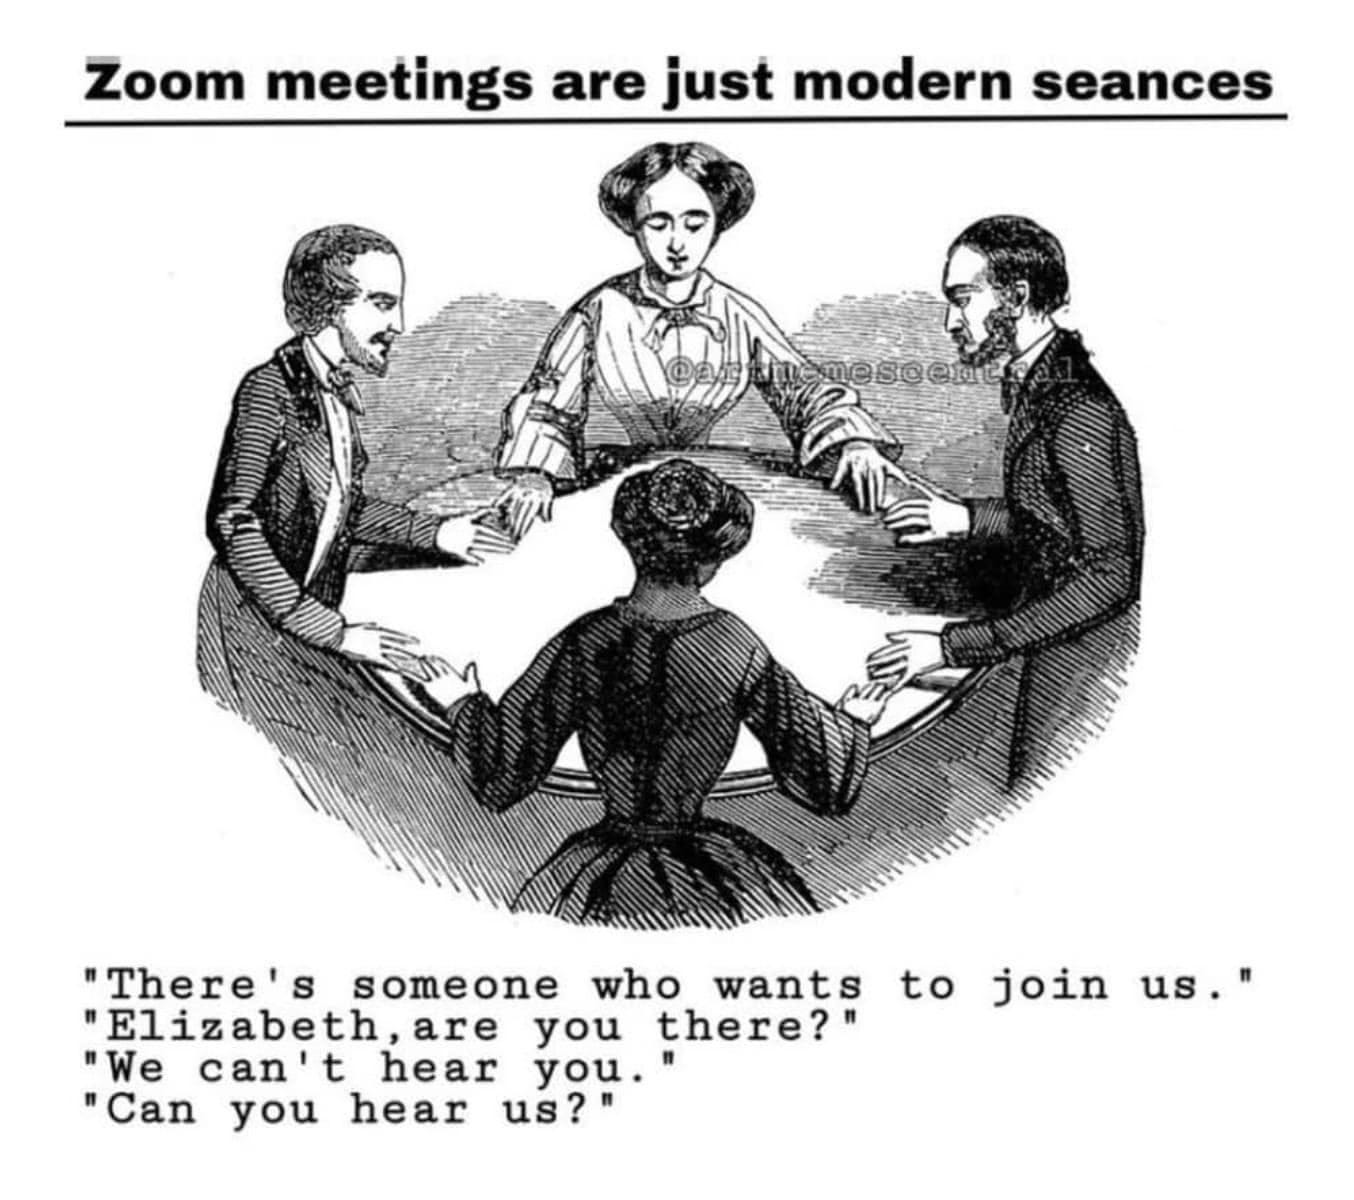 May be a cartoon of 2 people and text that says 'Zoom meetings are just modern seances meseent ent "There's someone who wants "Elizabeth, are you there? "We can't hear you "Can you hear us?" to join us."'